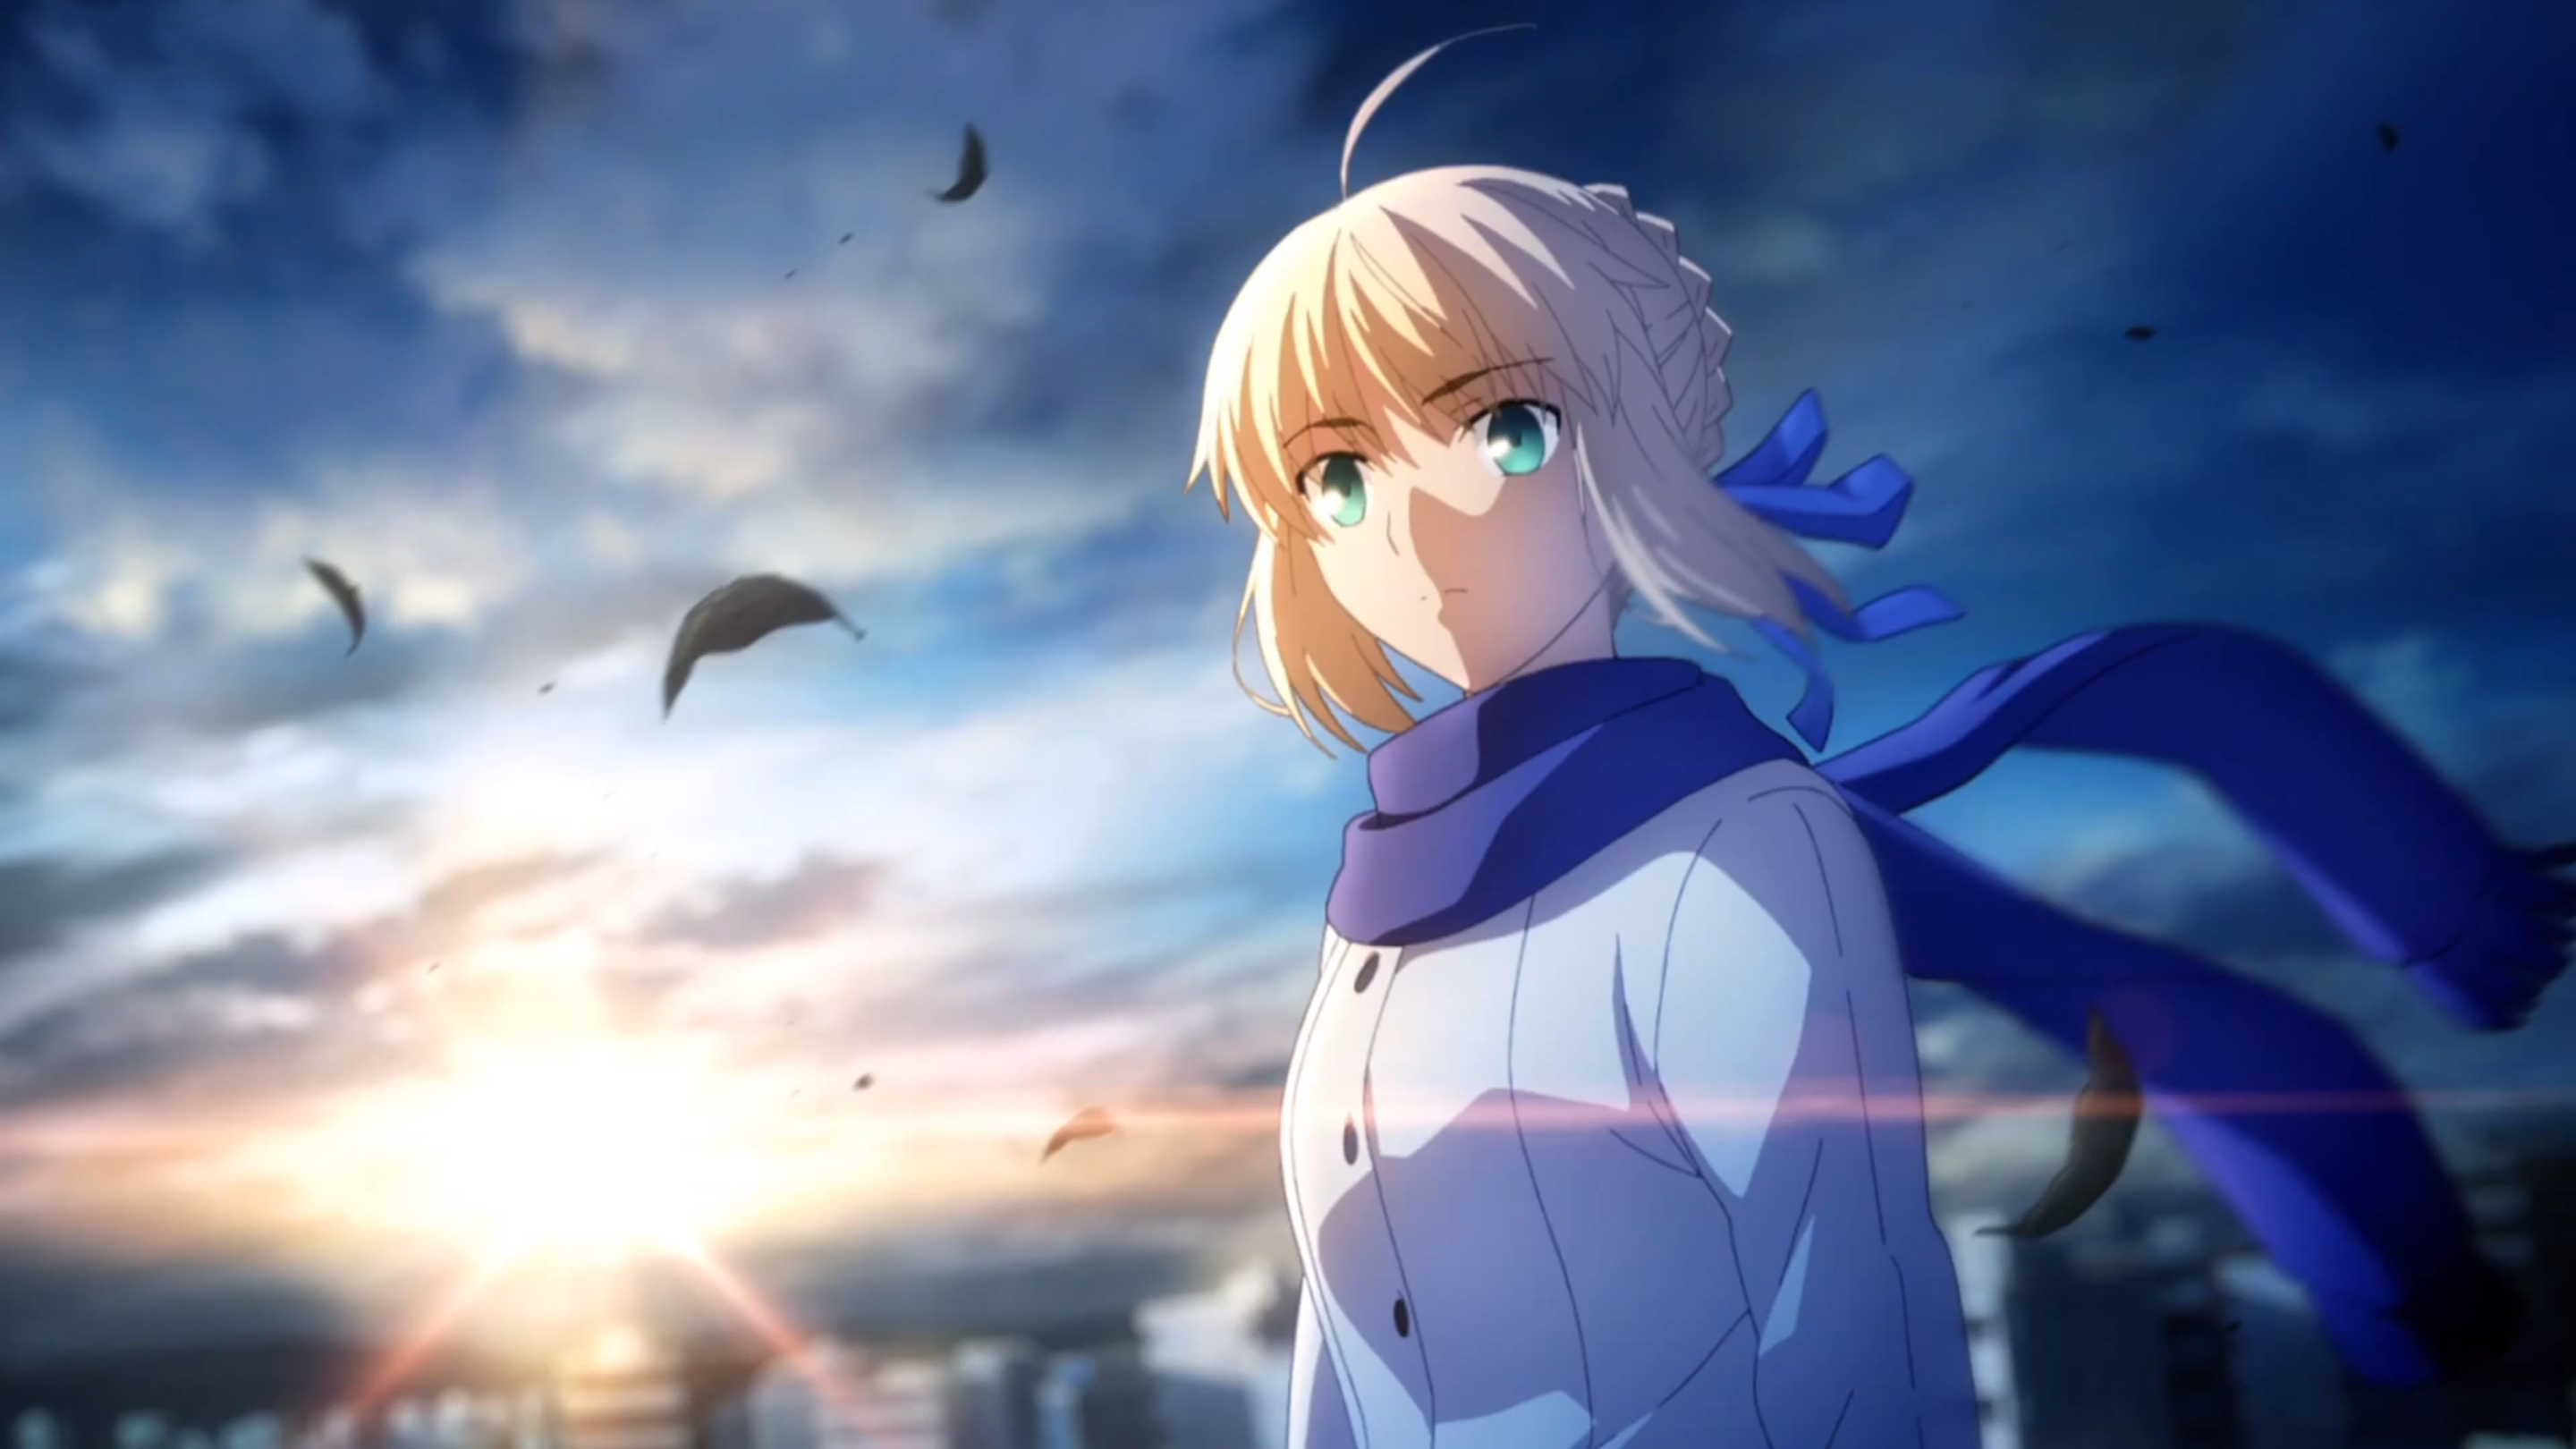 Nice Images Collection: Fate Stay Night: Unlimited Blade Works Desktop Wallpapers